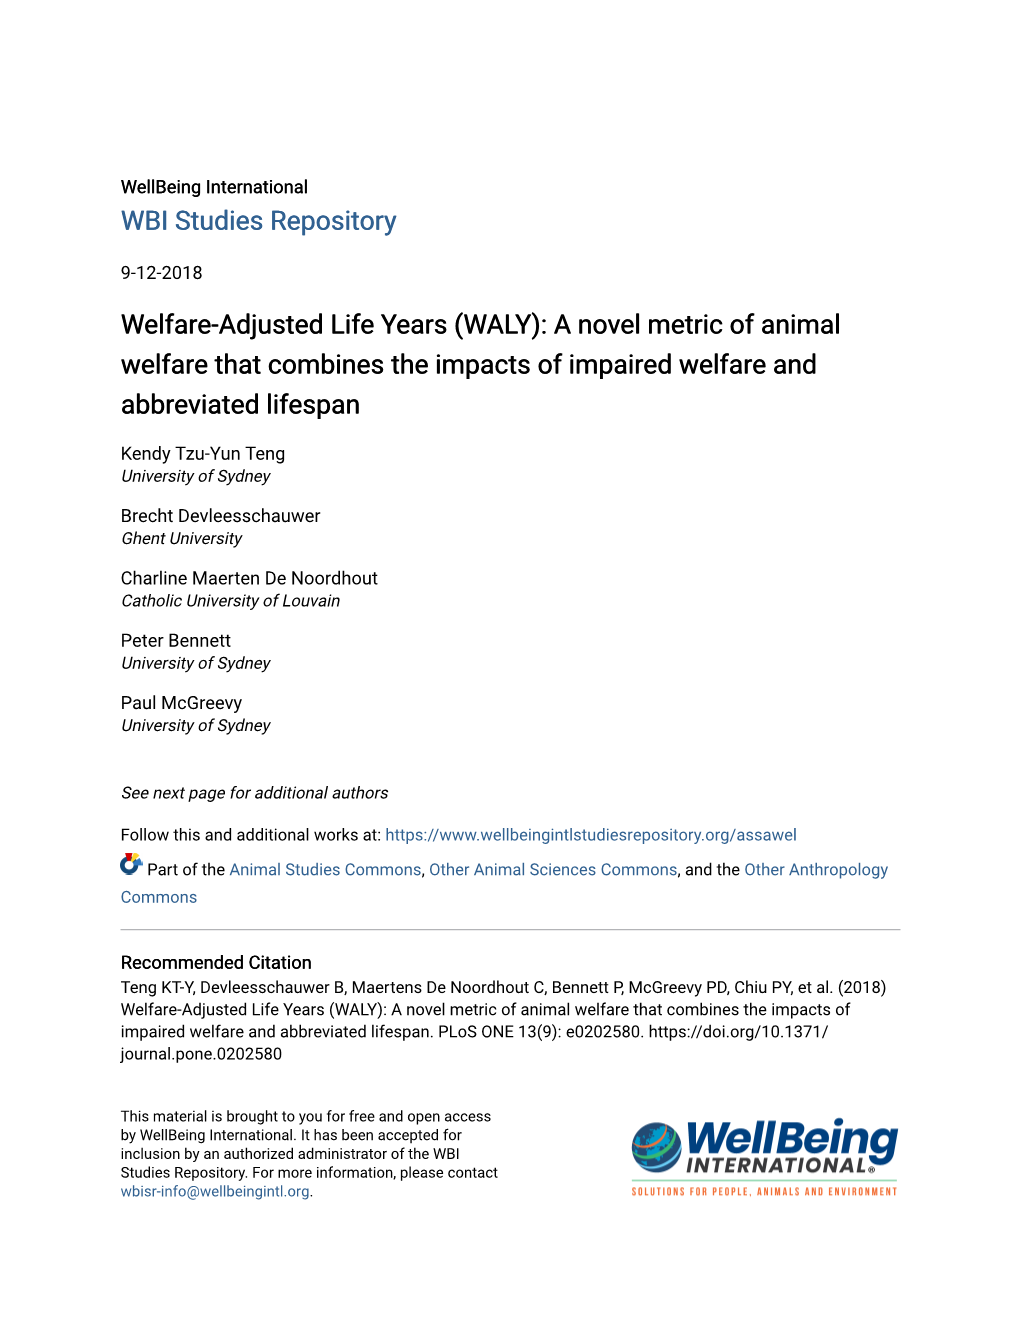 (WALY): a Novel Metric of Animal Welfare That Combines the Impacts of Impaired Welfare and Abbreviated Lifespan